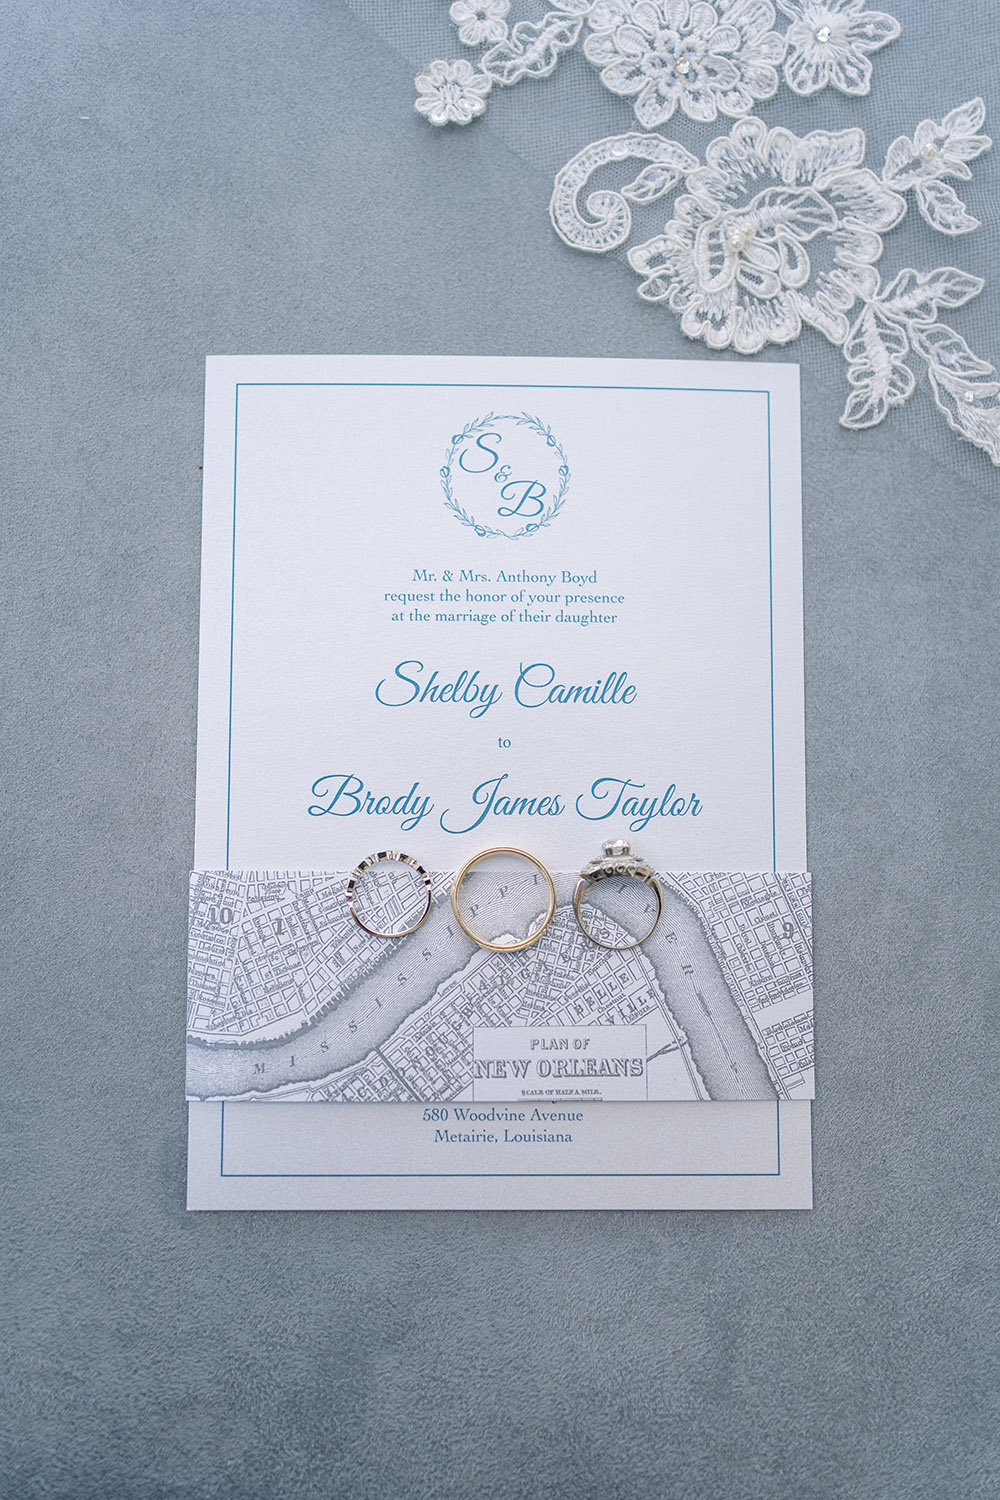 The wedding rings on the wedding invitations.